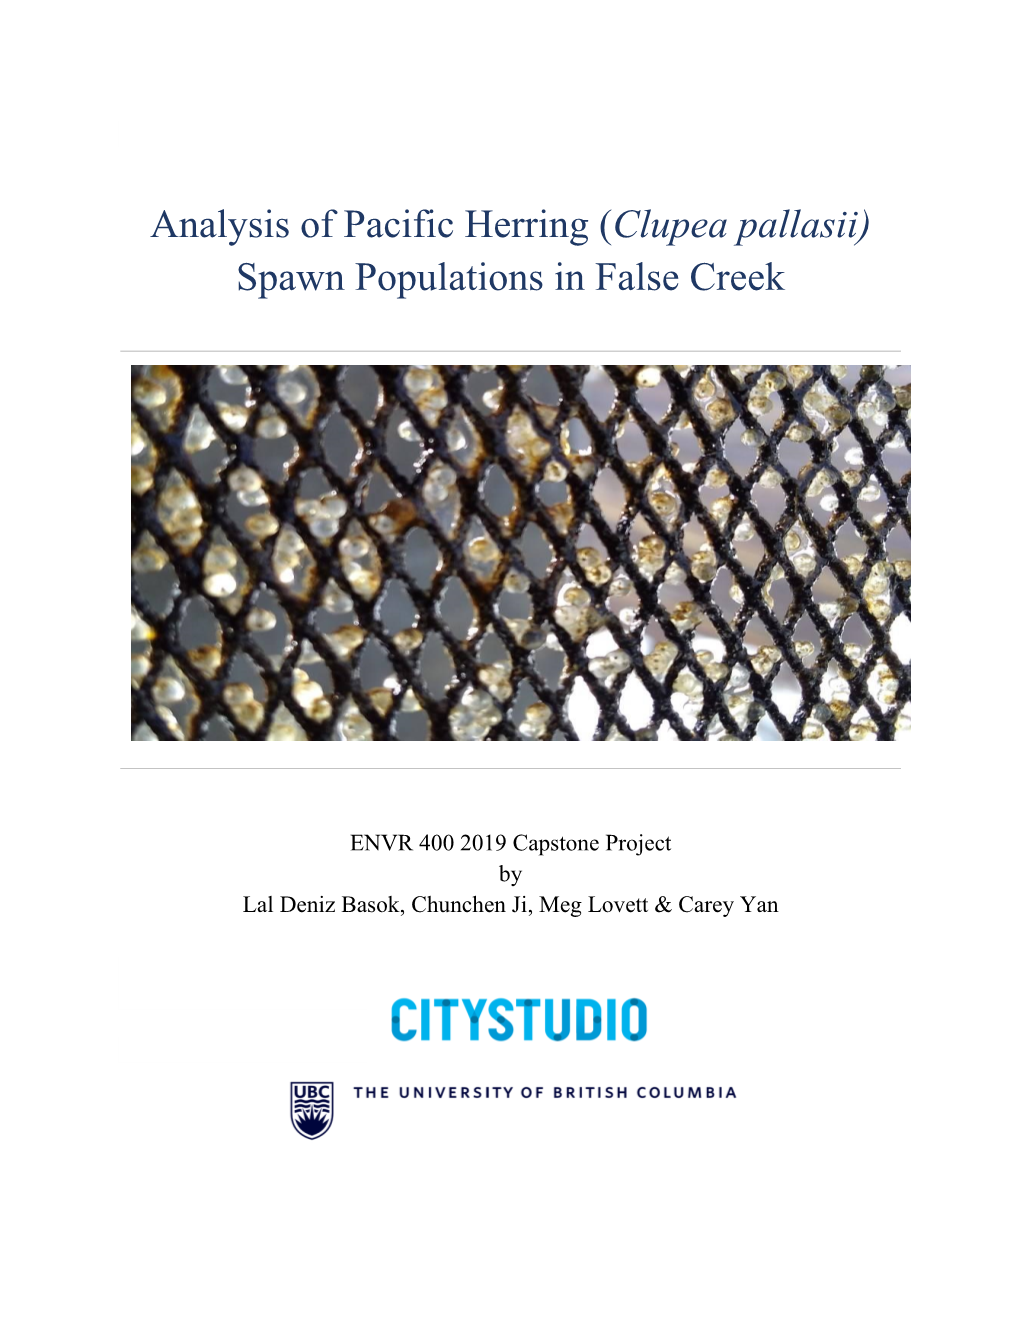 Analysis of Pacific Herring (Clupea Pallasii) Spawn Populations in False Creek